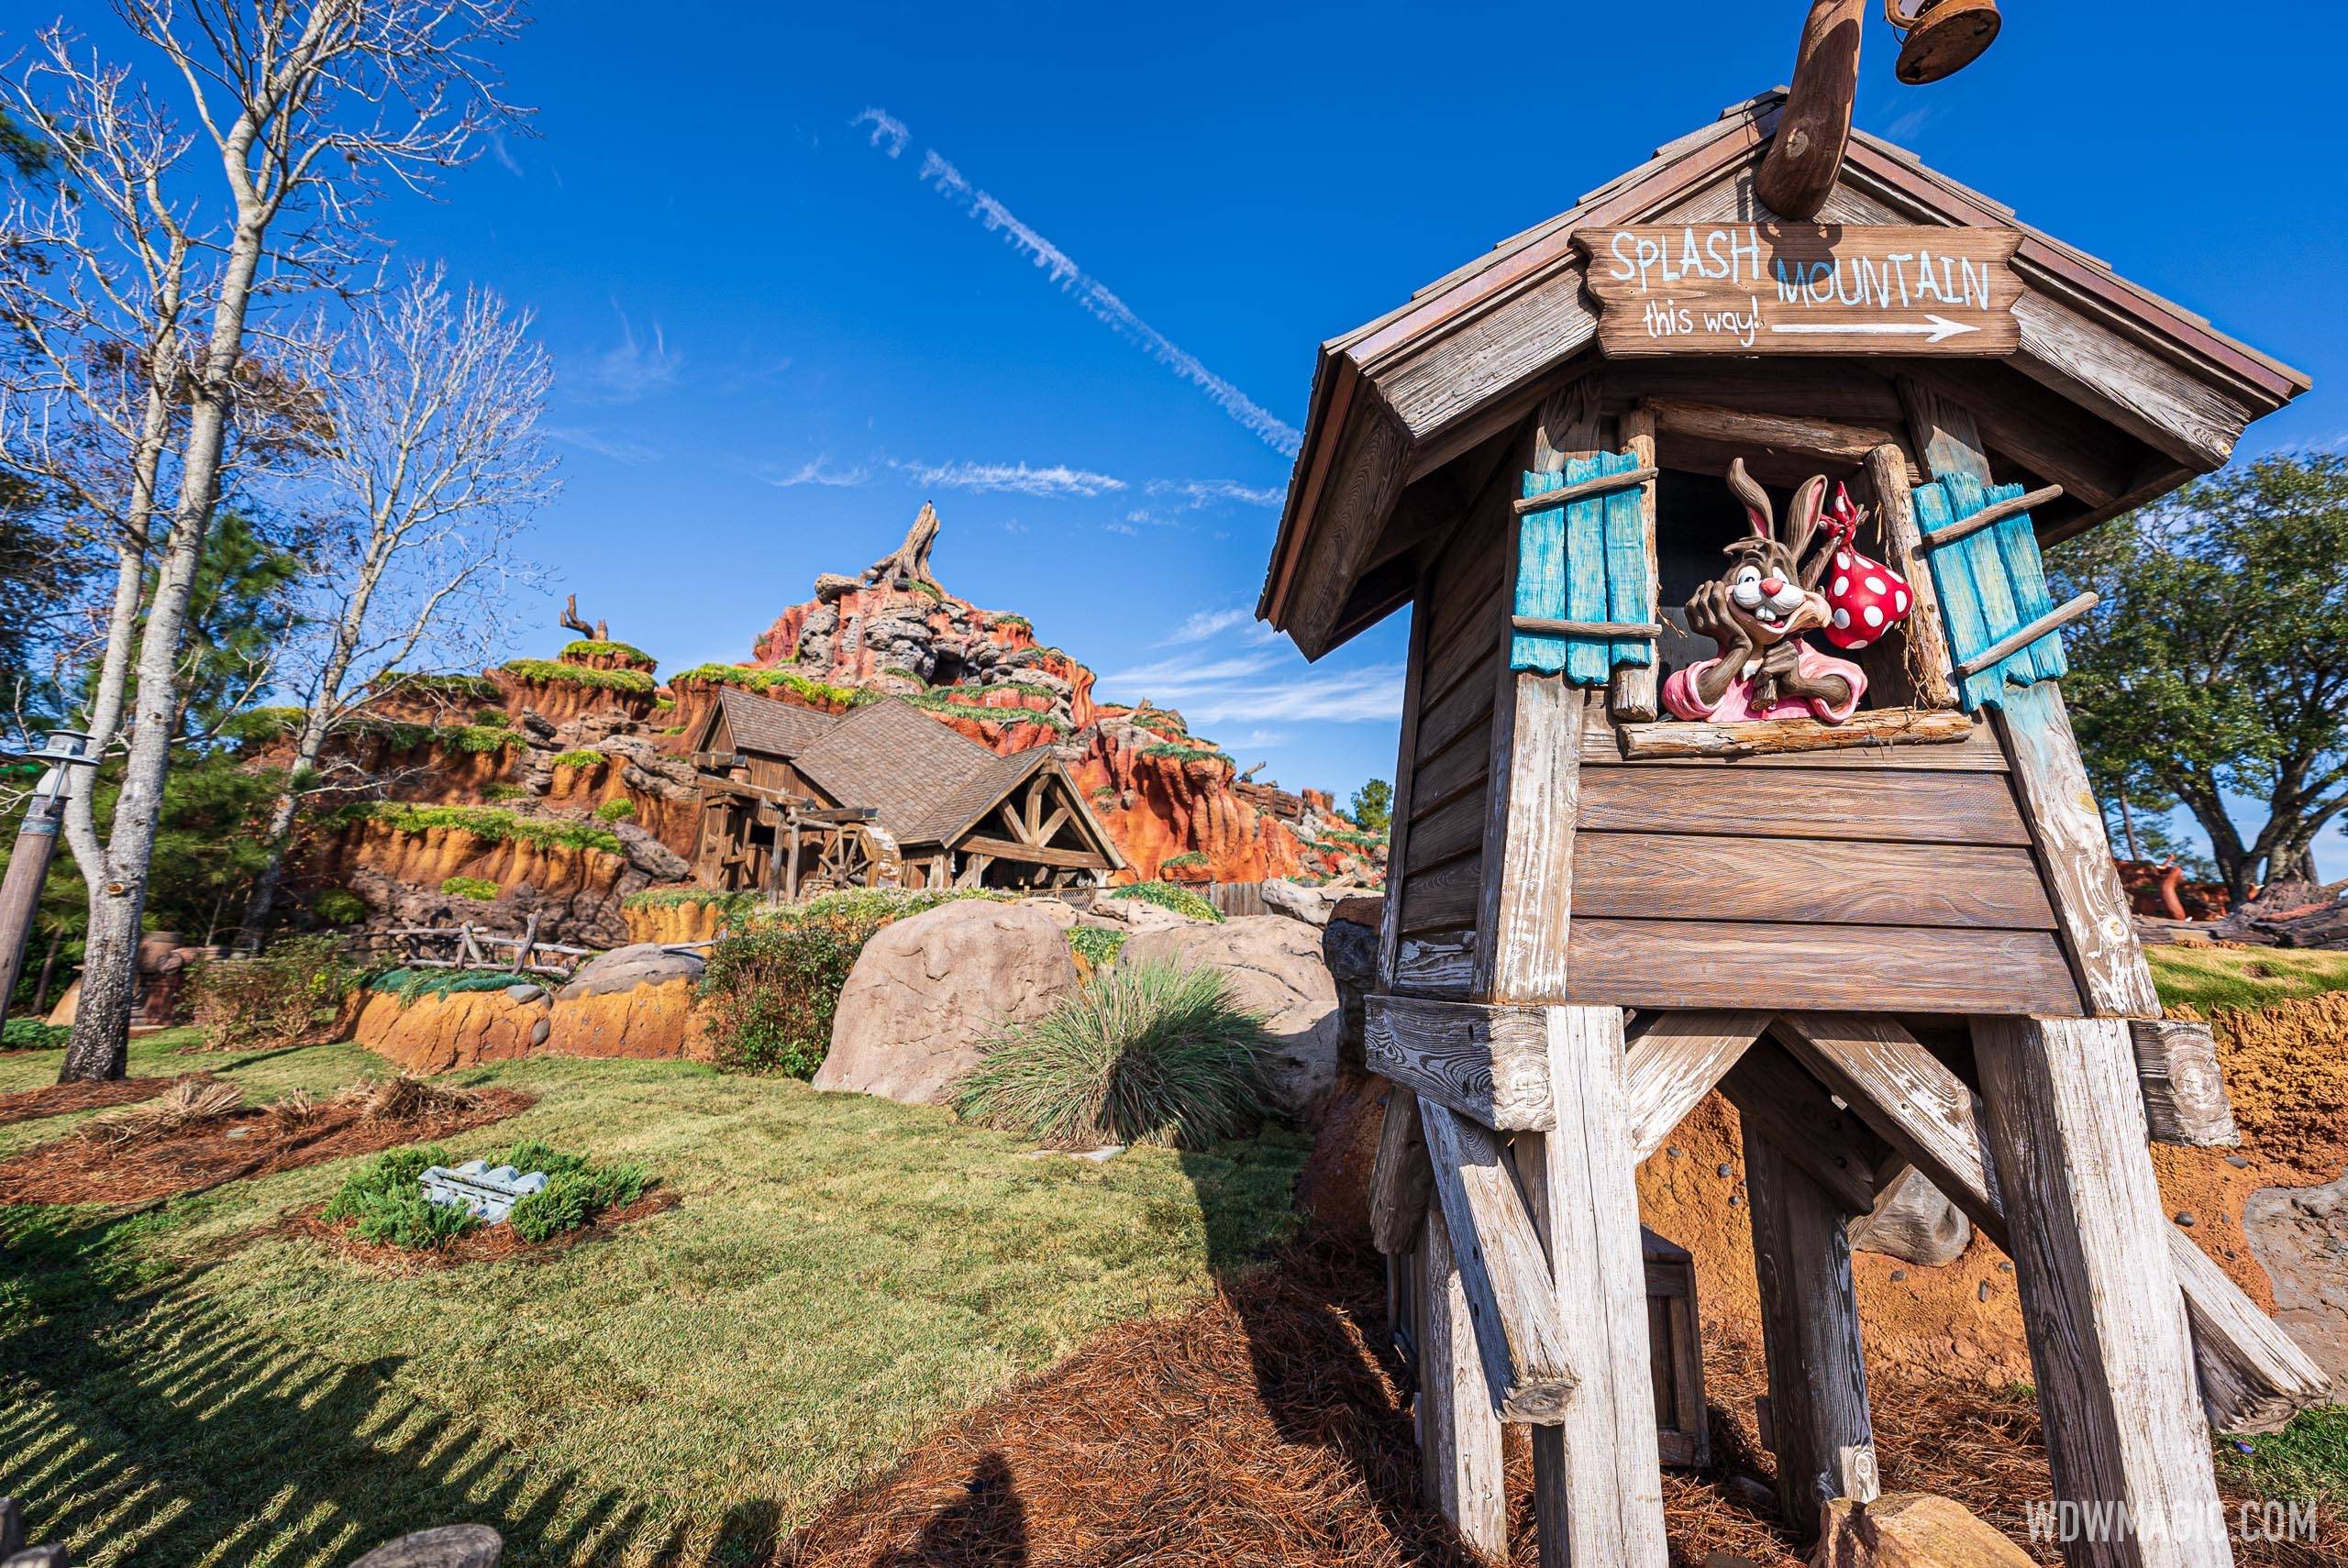 Splash Mountain back open at Magic Kingdom after delayed reopening from refurbishment